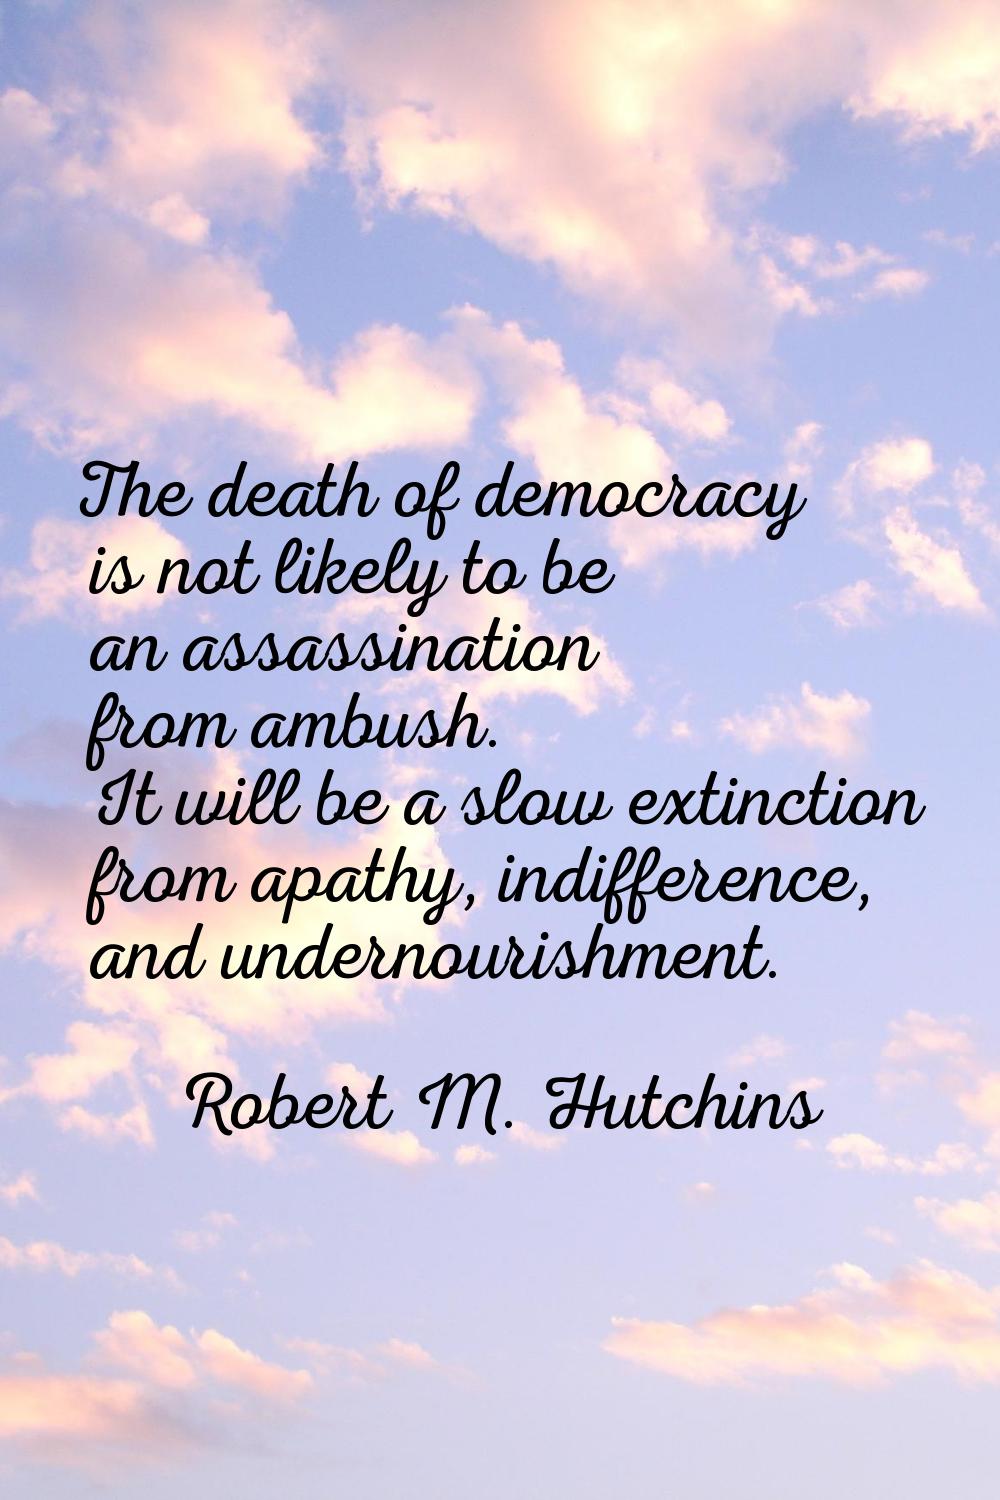 The death of democracy is not likely to be an assassination from ambush. It will be a slow extincti